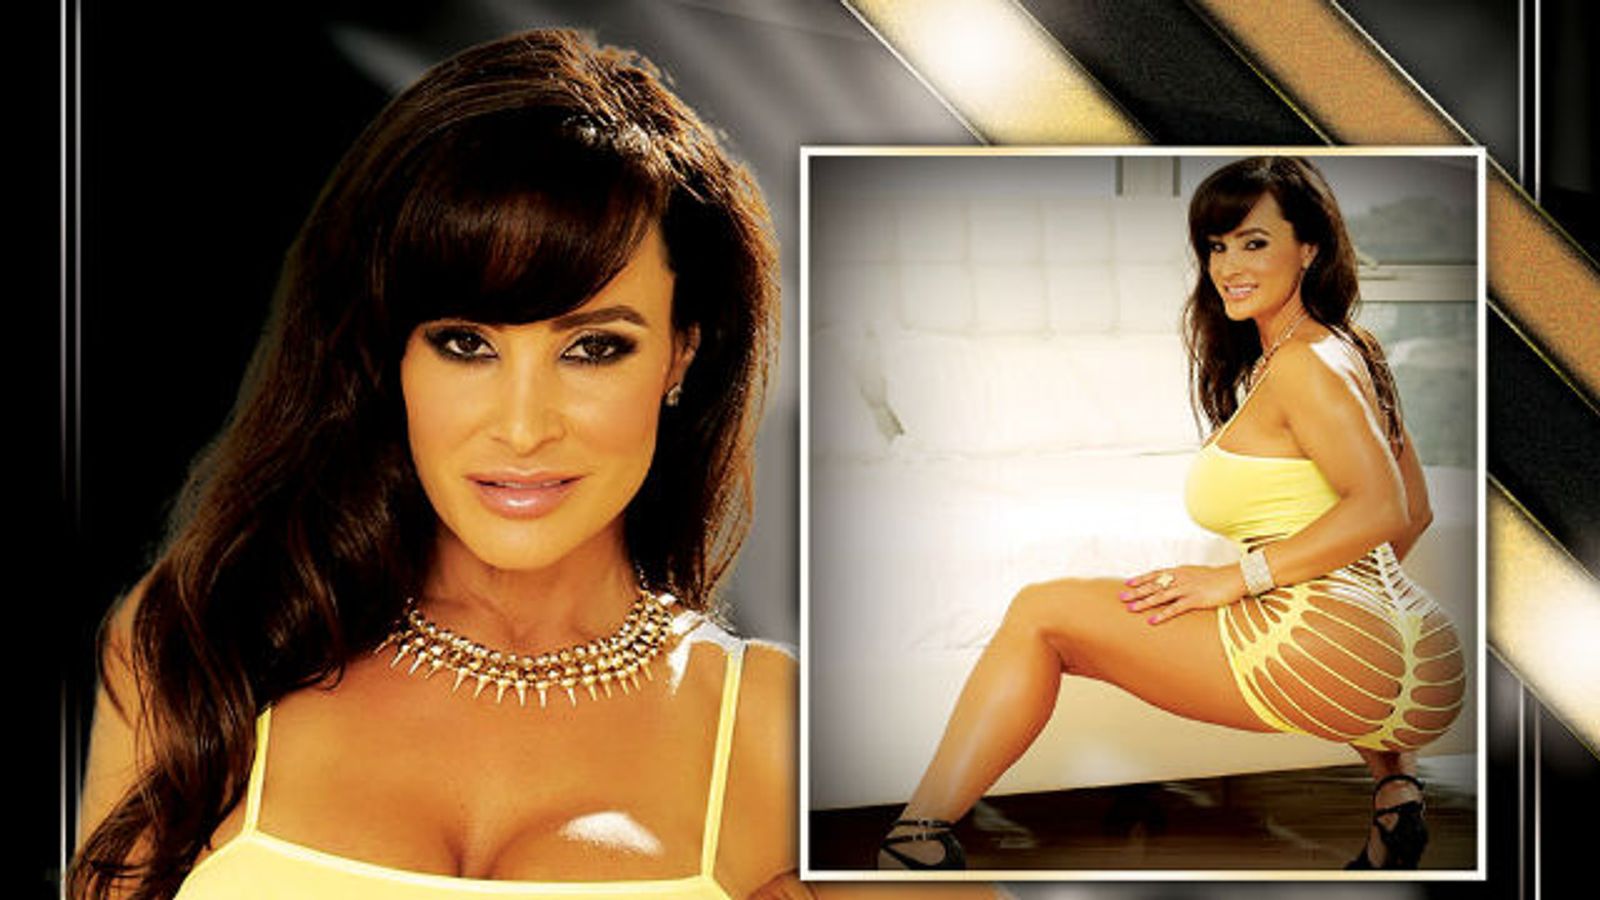 Lisa Ann to Host Birthday Party Tomorrow at Headquarters in NYC